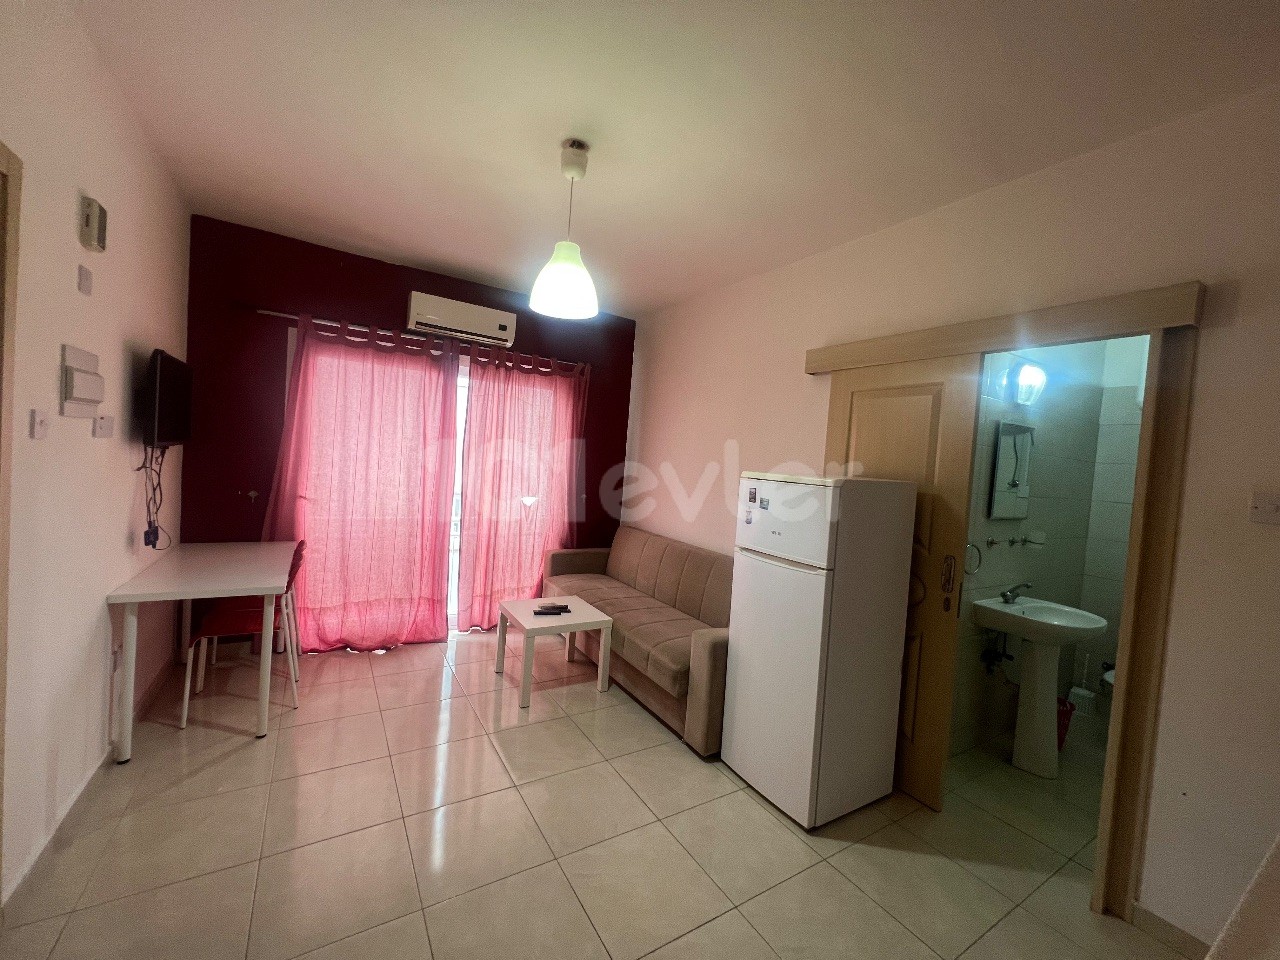 FLAT FOR RENT ON SALAMIS STREET, 10 MINUTES FROM THE SCHOOL, 10 months payment